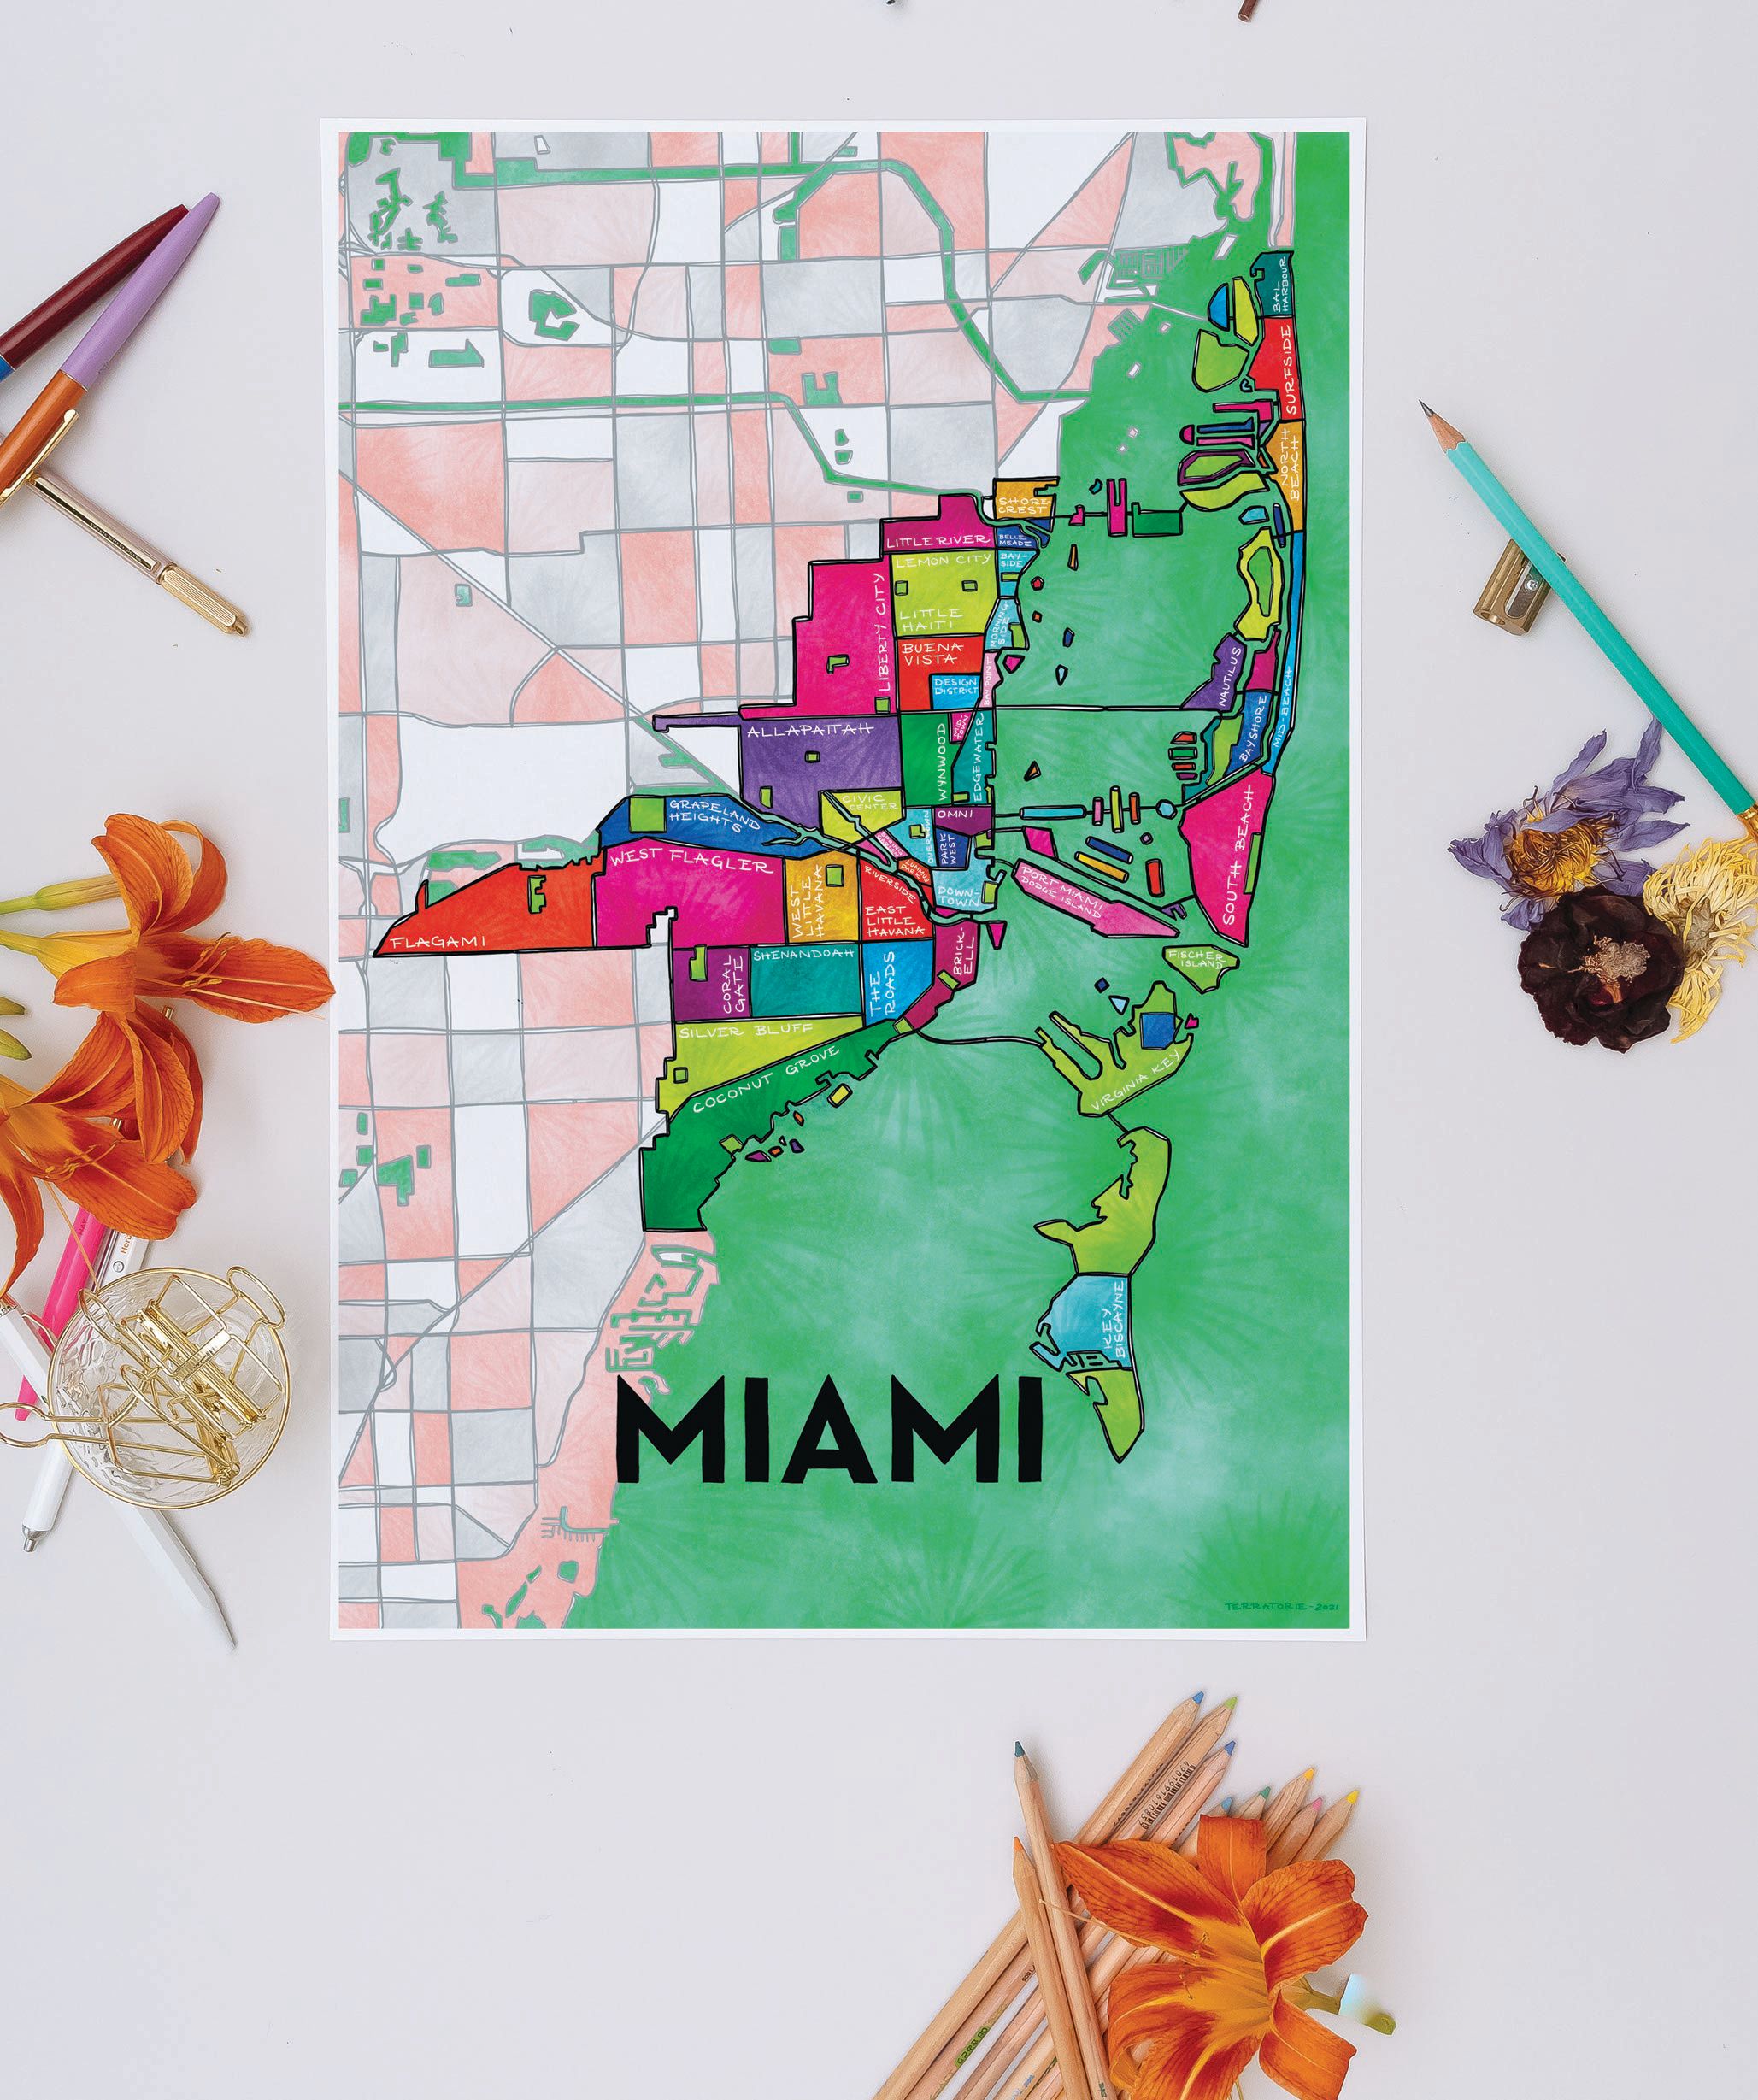 Terratorie’s City Maps Collection pays homage to some of the country’s most iconic cities, including Miami. PHOTO COURTESY OF TERRATORIE